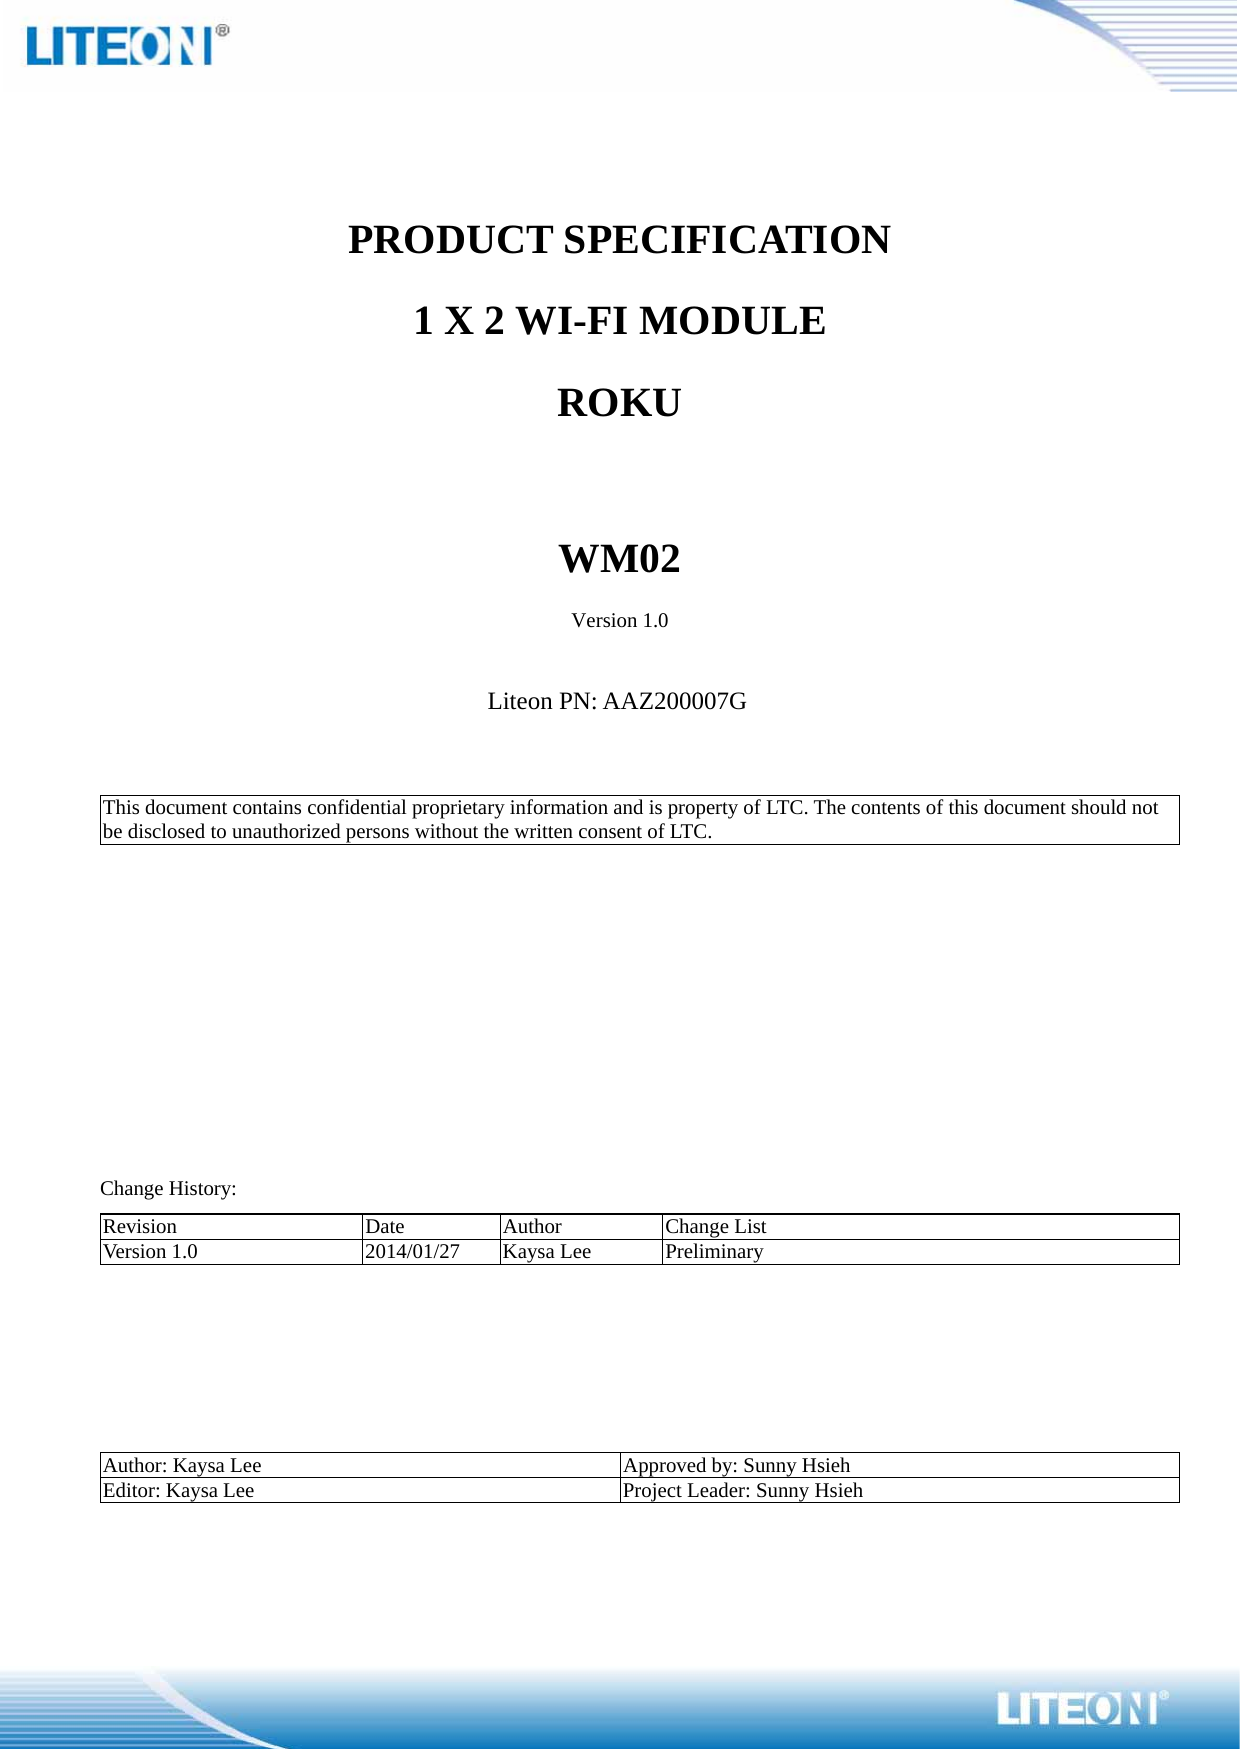    PRODUCT SPECIFICATION 1 X 2 WI-FI MODULE   ROKU   WM02 Version 1.0  Liteon PN: AAZ200007G   This document contains confidential proprietary information and is property of LTC. The contents of this document should not be disclosed to unauthorized persons without the written consent of LTC.               Change History: Revision Date Author Change List Version 1.0  2014/01/27  Kaysa Lee  Preliminary      Author: Kaysa Lee  Approved by: Sunny Hsieh Editor: Kaysa Lee  Project Leader: Sunny Hsieh 